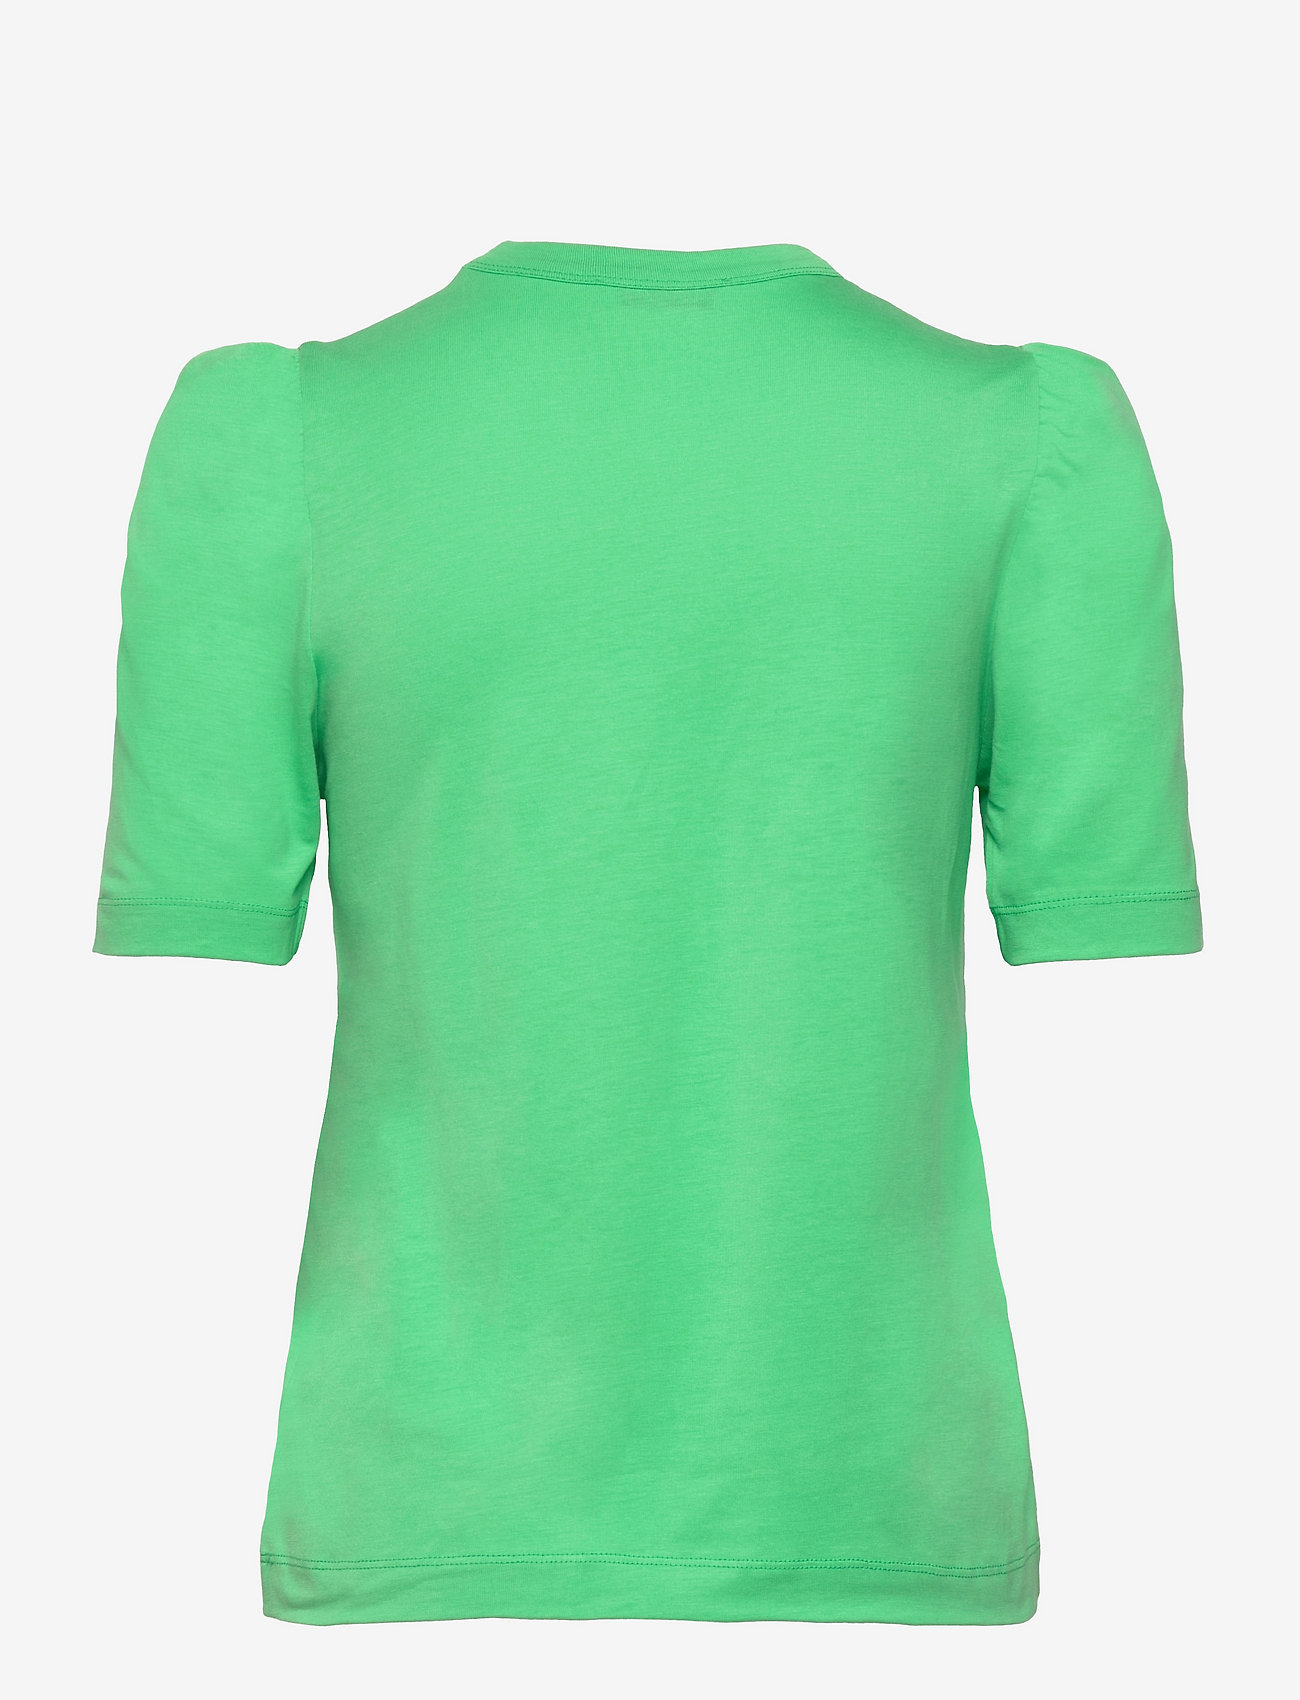 RODEBJER - RODEBJER DORY - t-shirts - soft green - 1